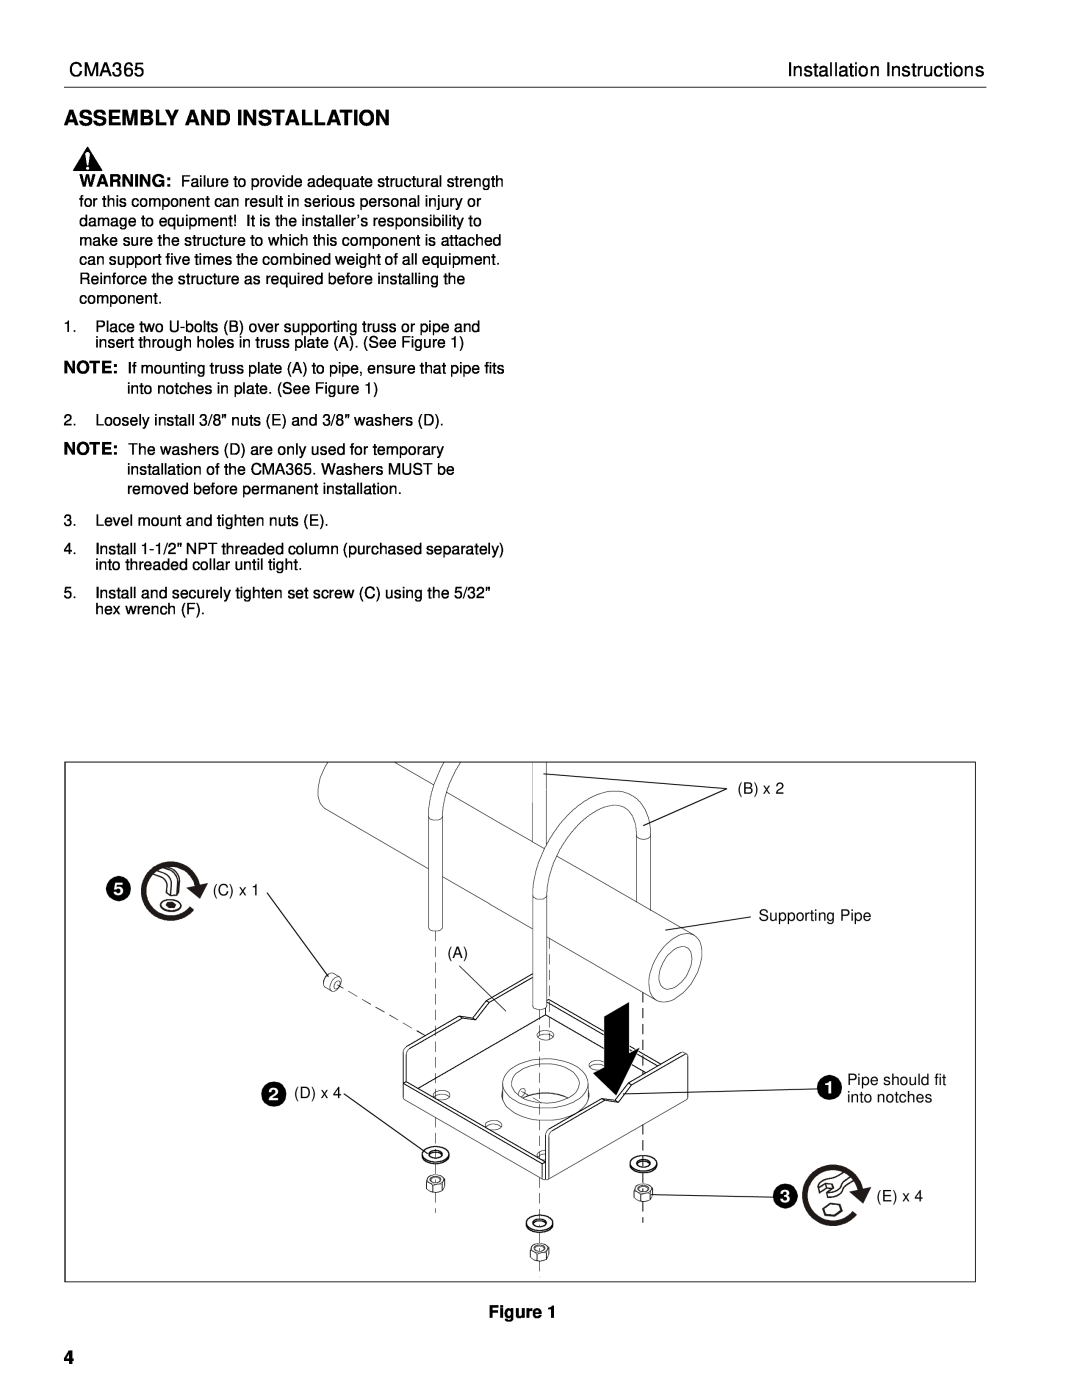 Chief Manufacturing CMA365 installation instructions Assembly And Installation, Installation Instructions, Pipe should fit 